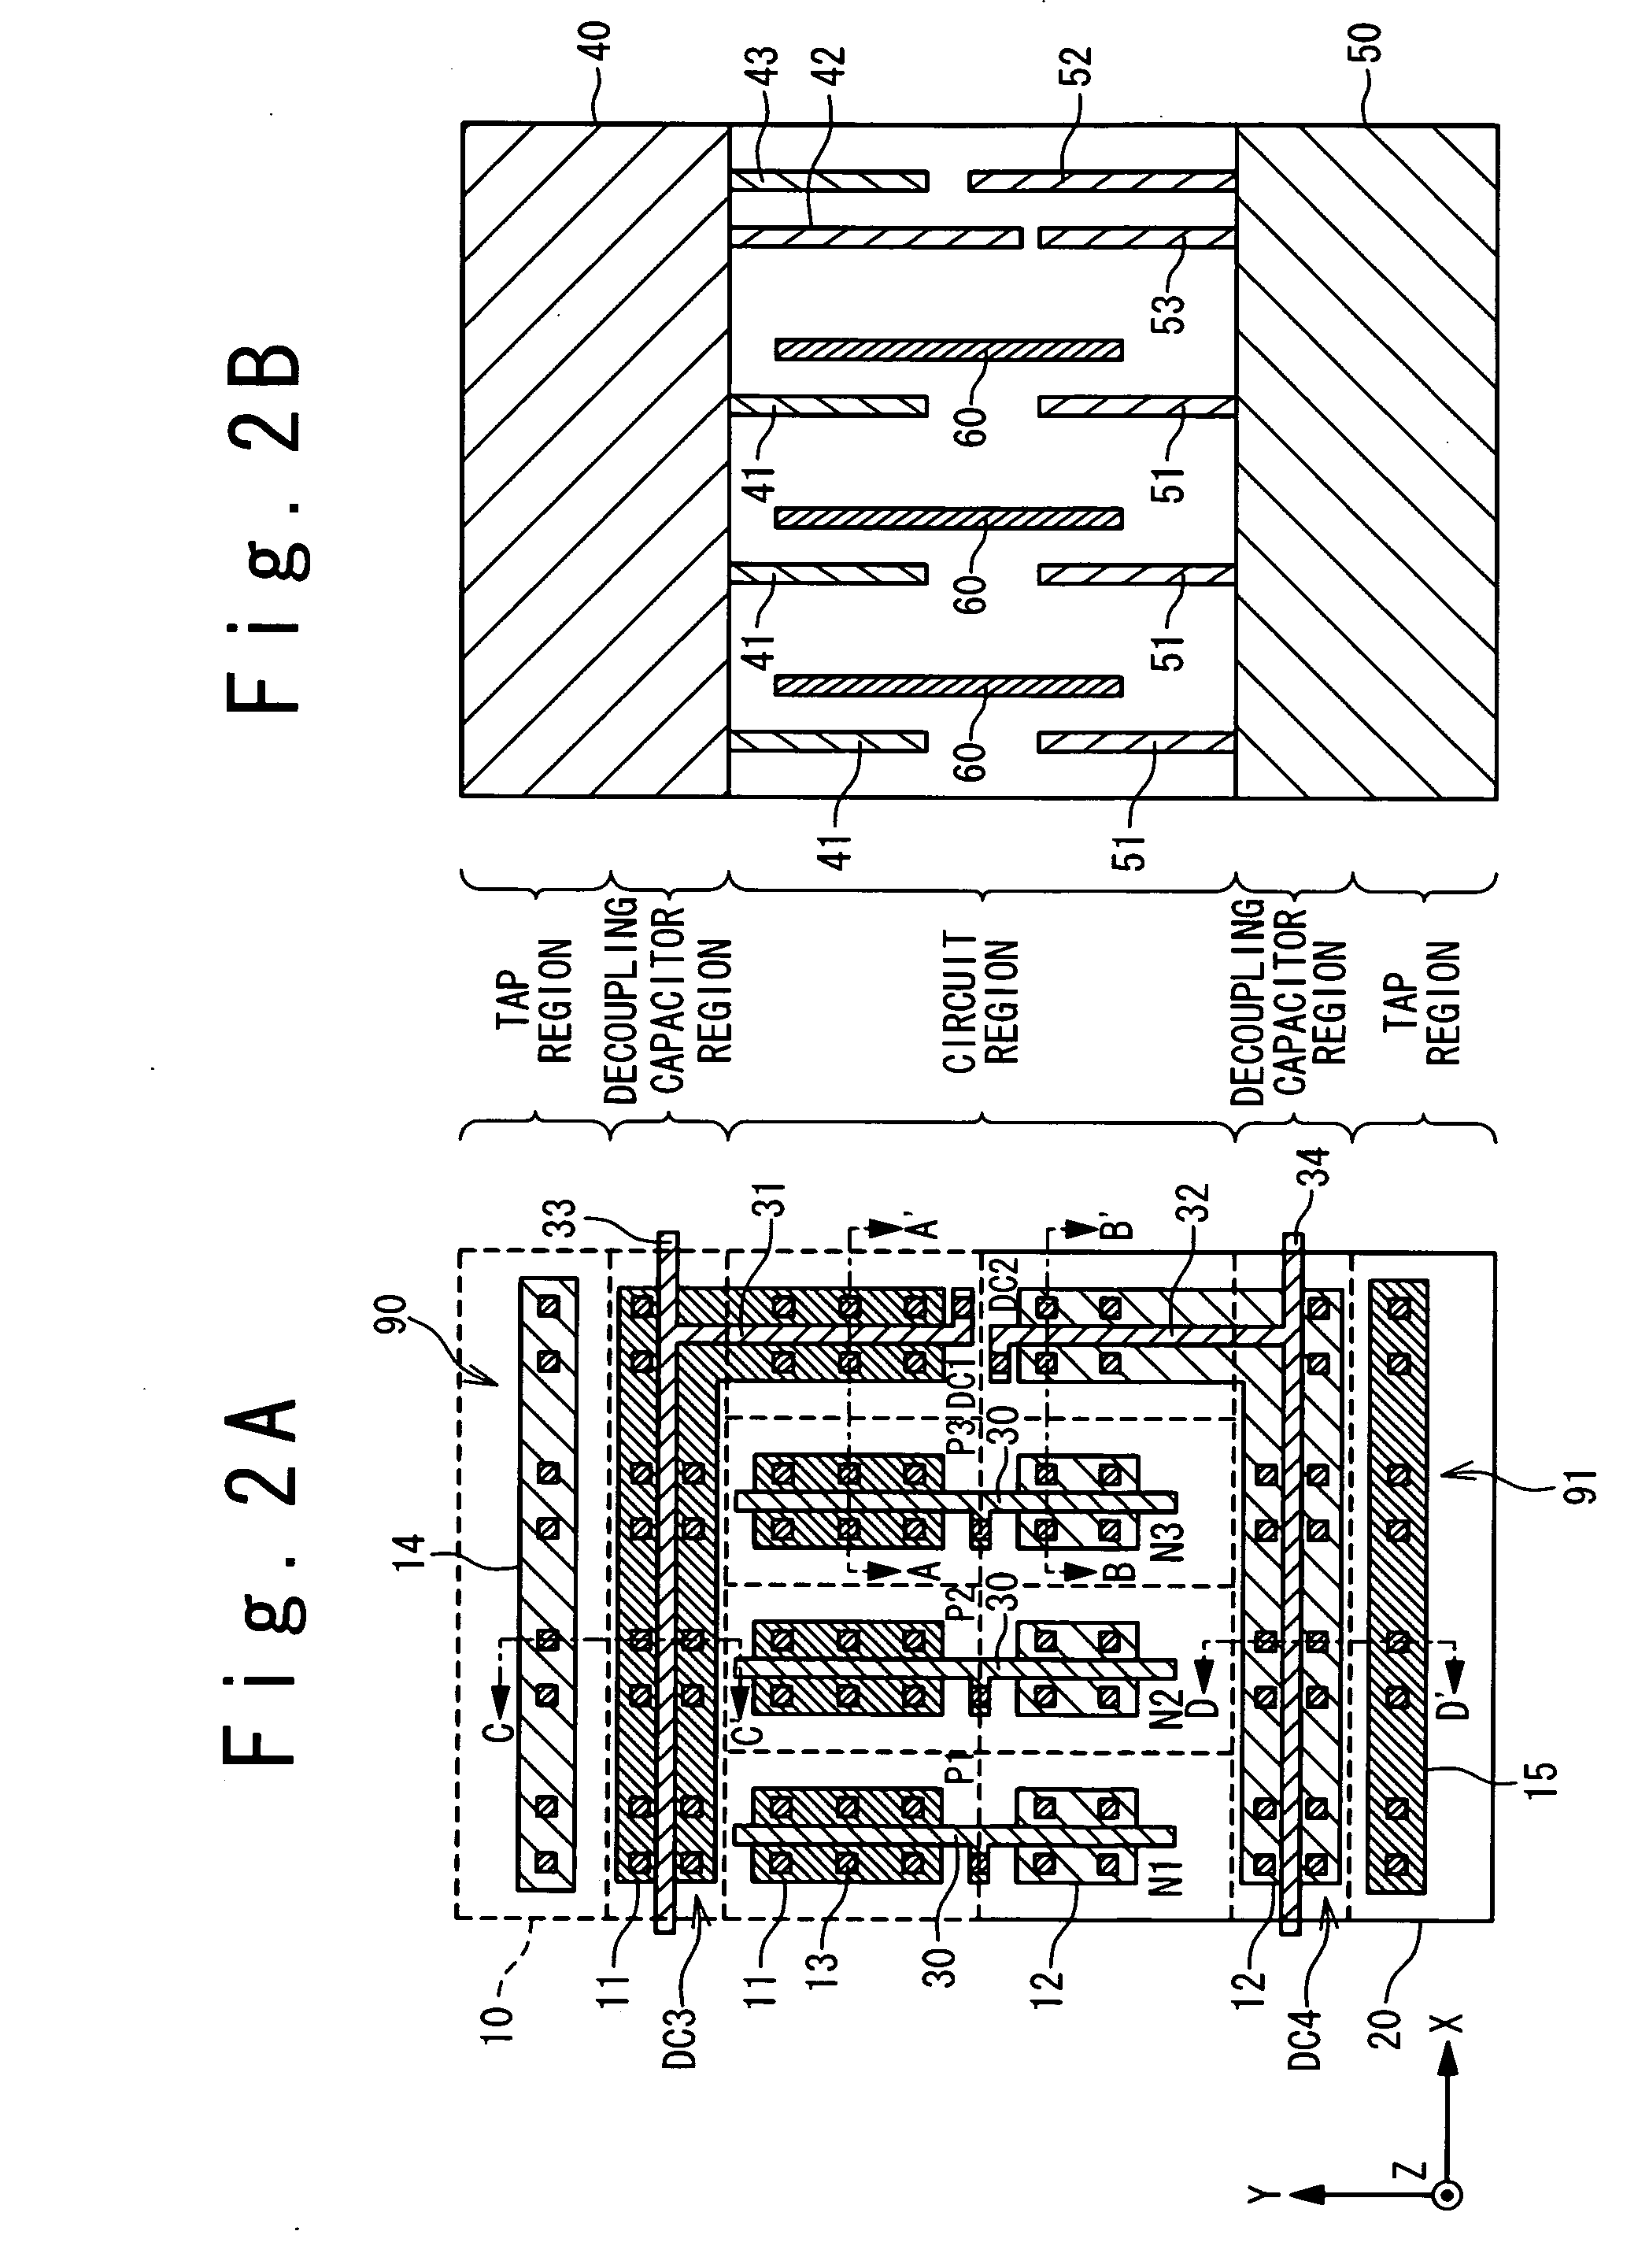 Integrated circuit incorporating decoupling capacitor under power and ground lines